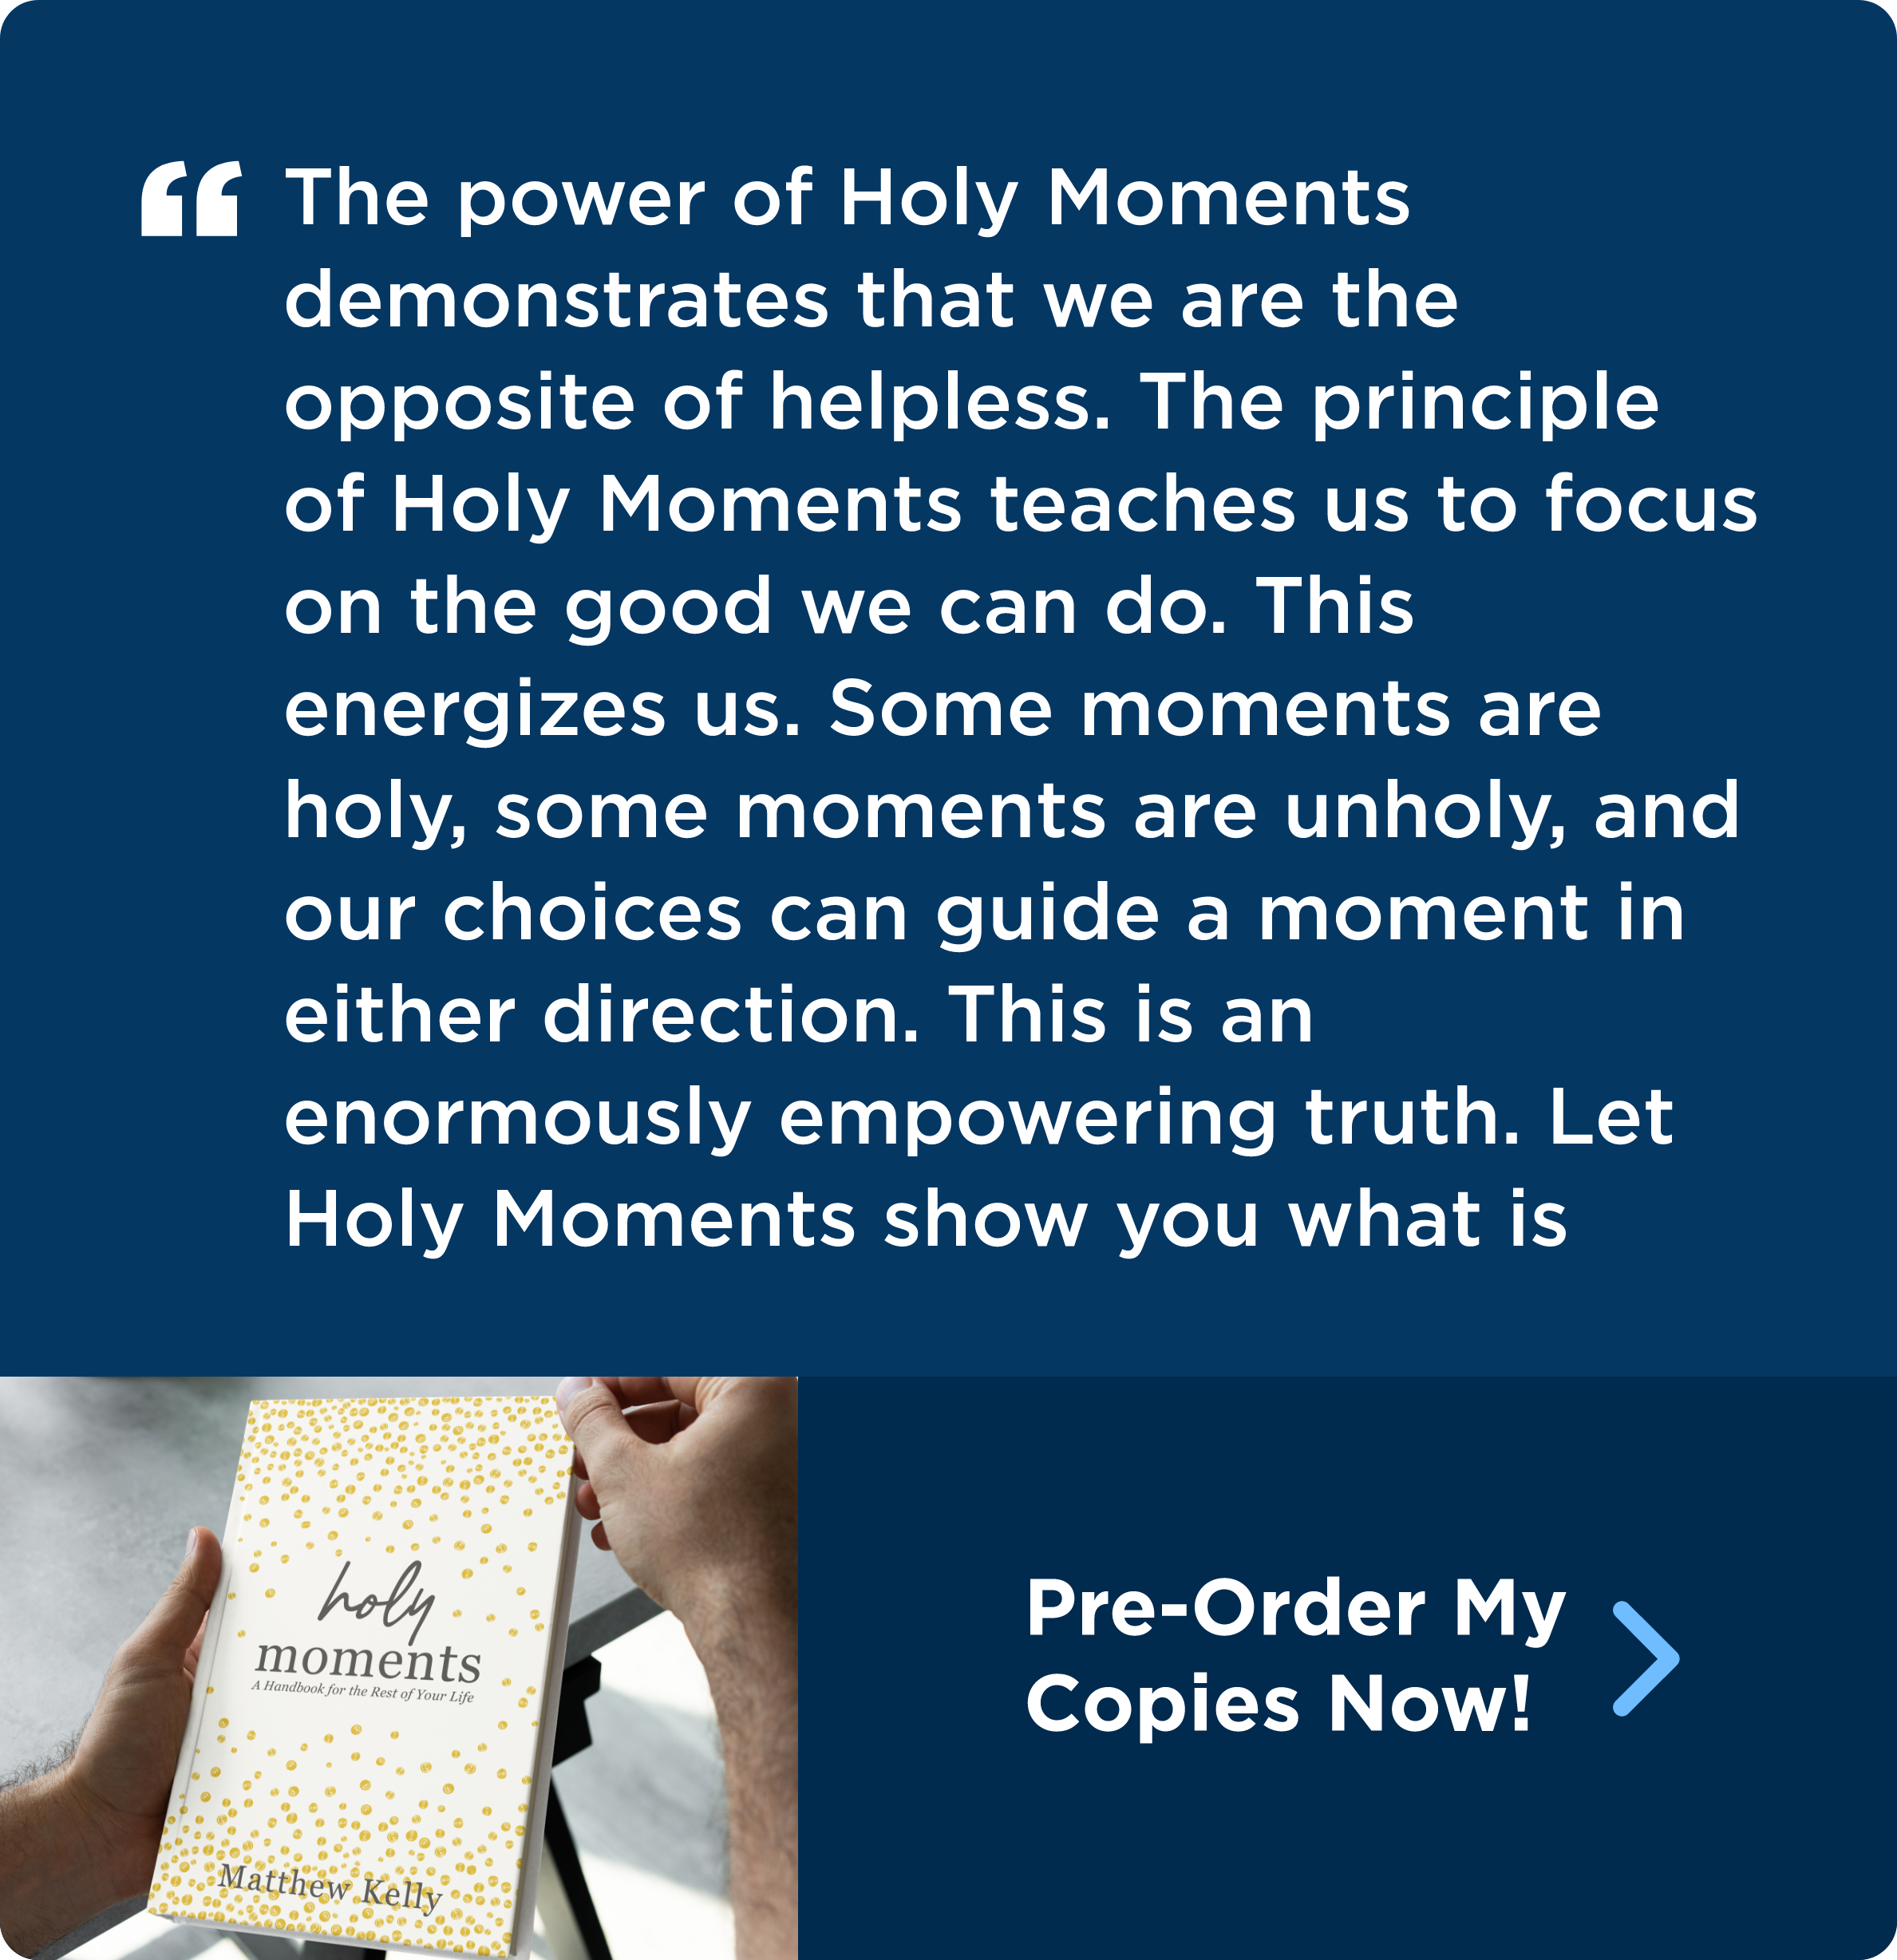 Pre-Order Holy Moments Now!